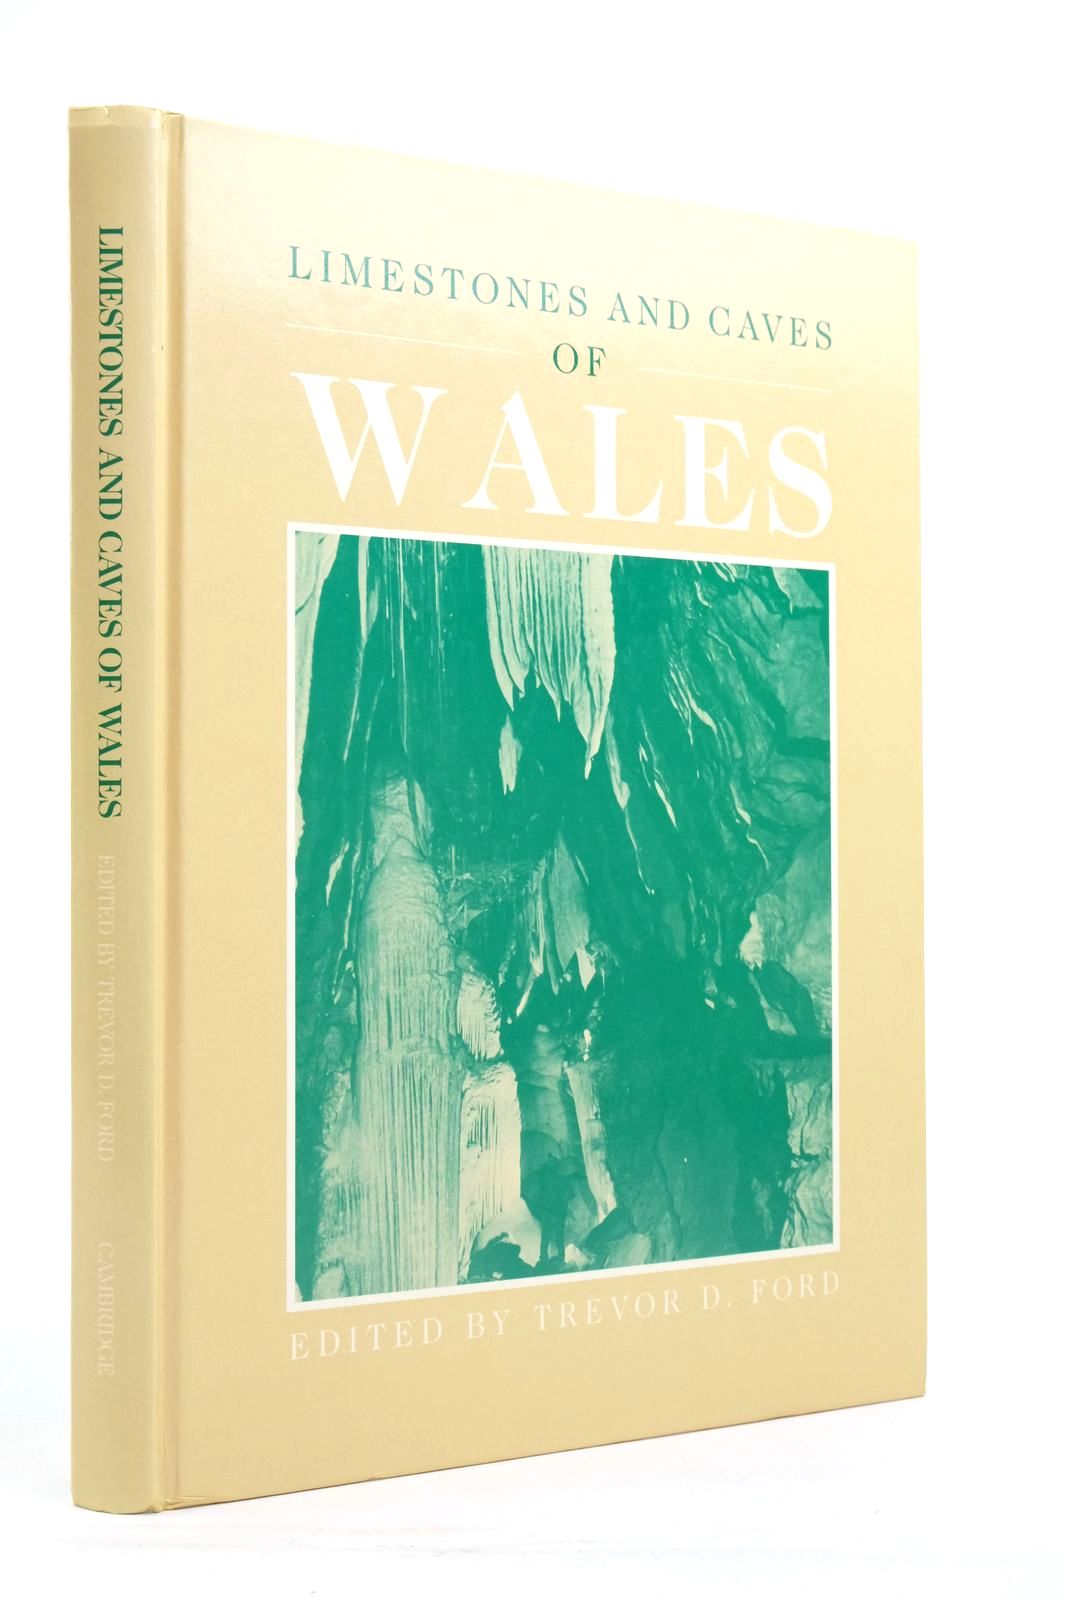 Photo of LIMESTONES AND CAVES OF WALES- Stock Number: 2137818